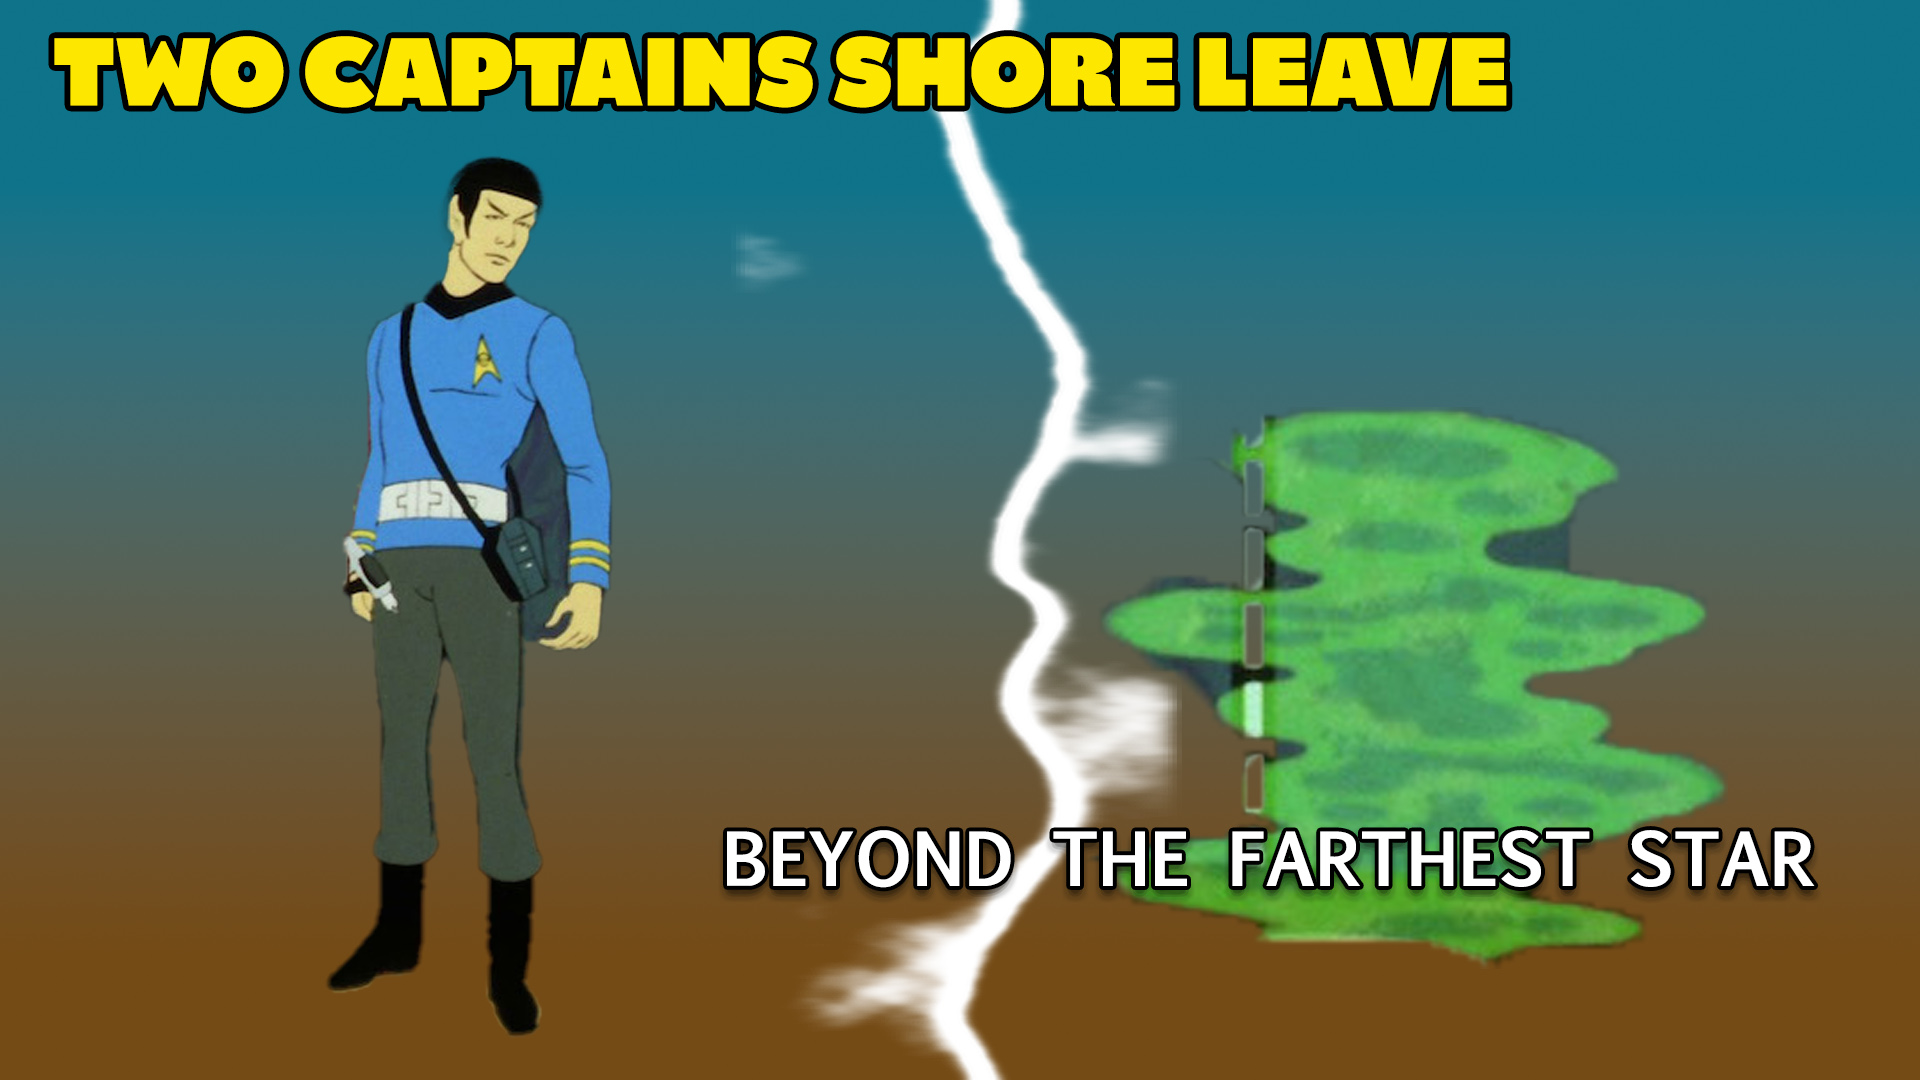 Two Captains Shore Leave: “Star Trek: The Animated Series” S1E1 – “Beyond the Farthest Star” Review